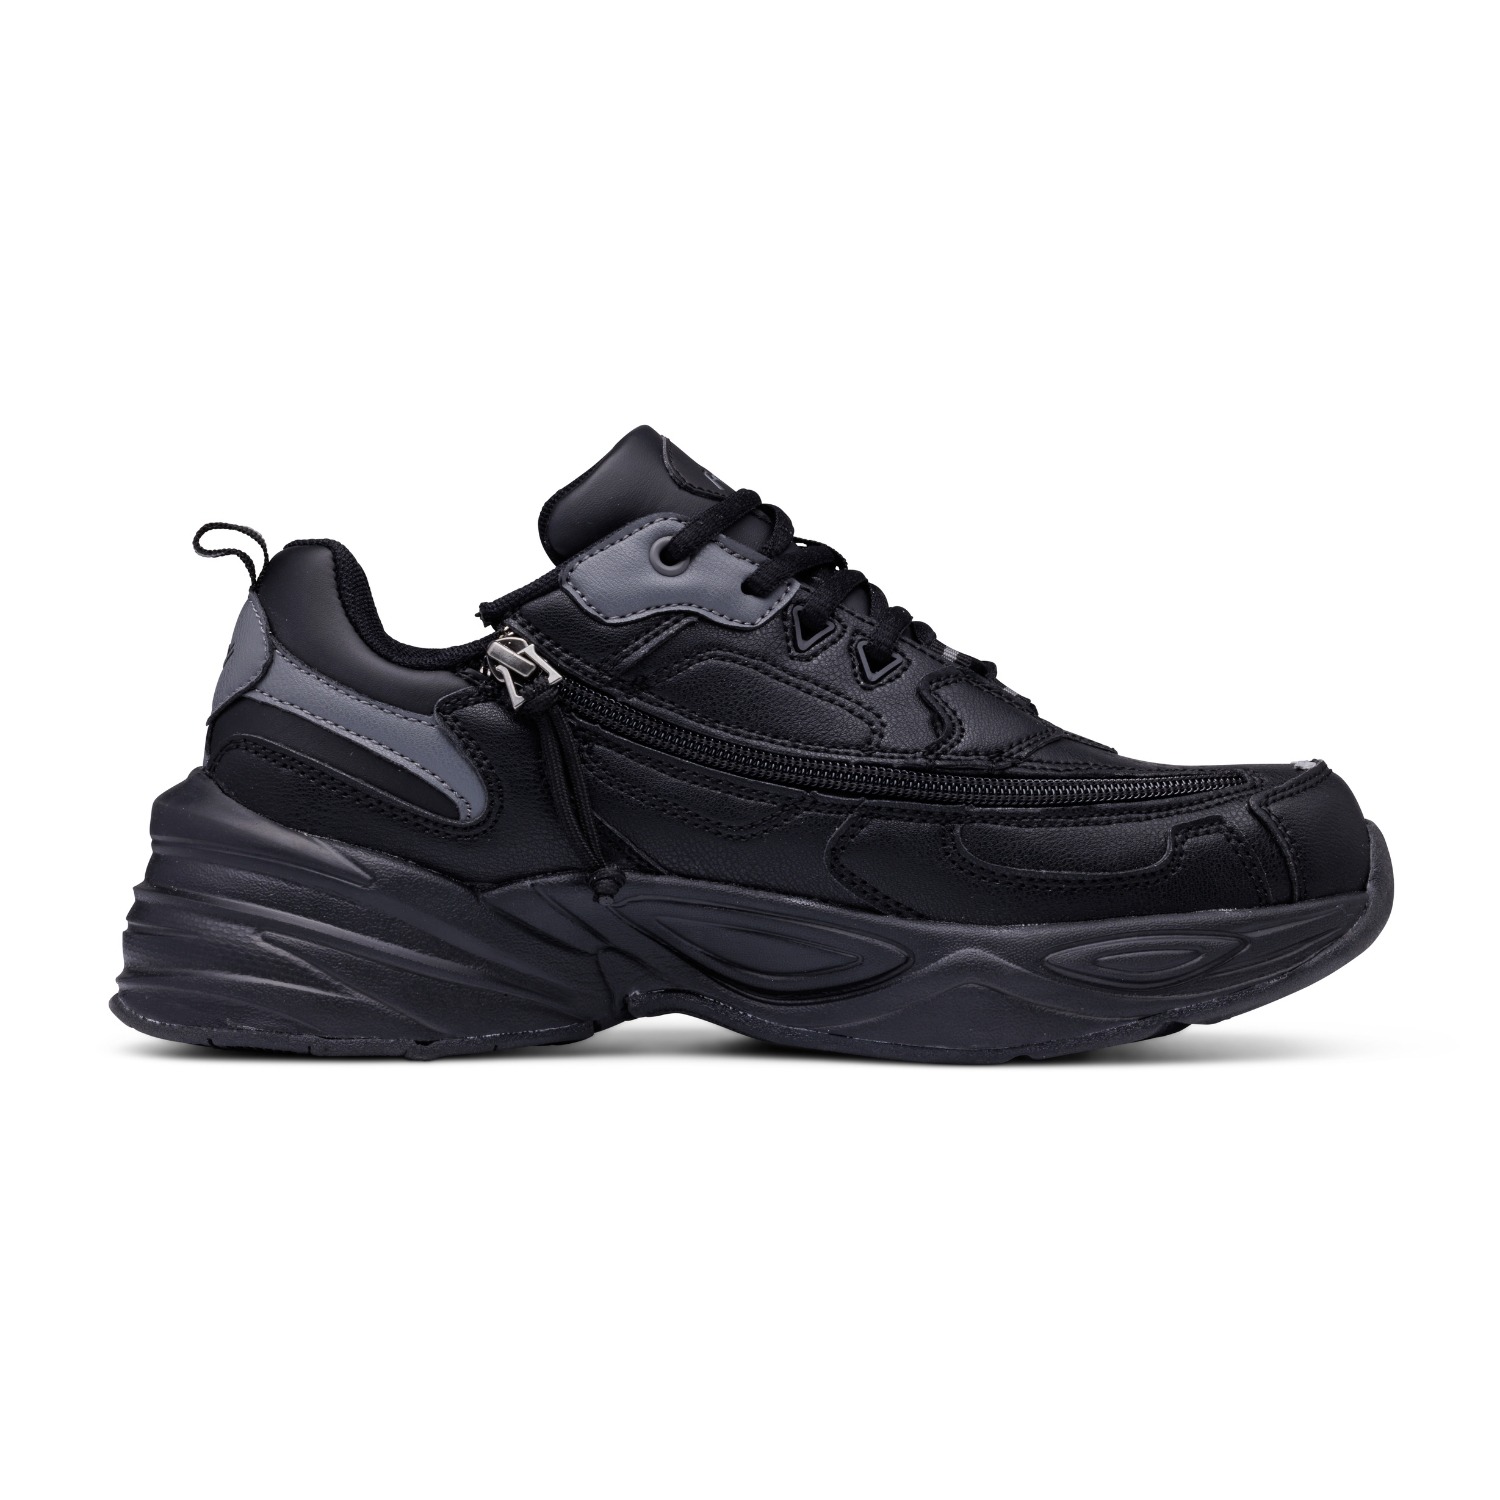 black adaptive shoe with front zipper access